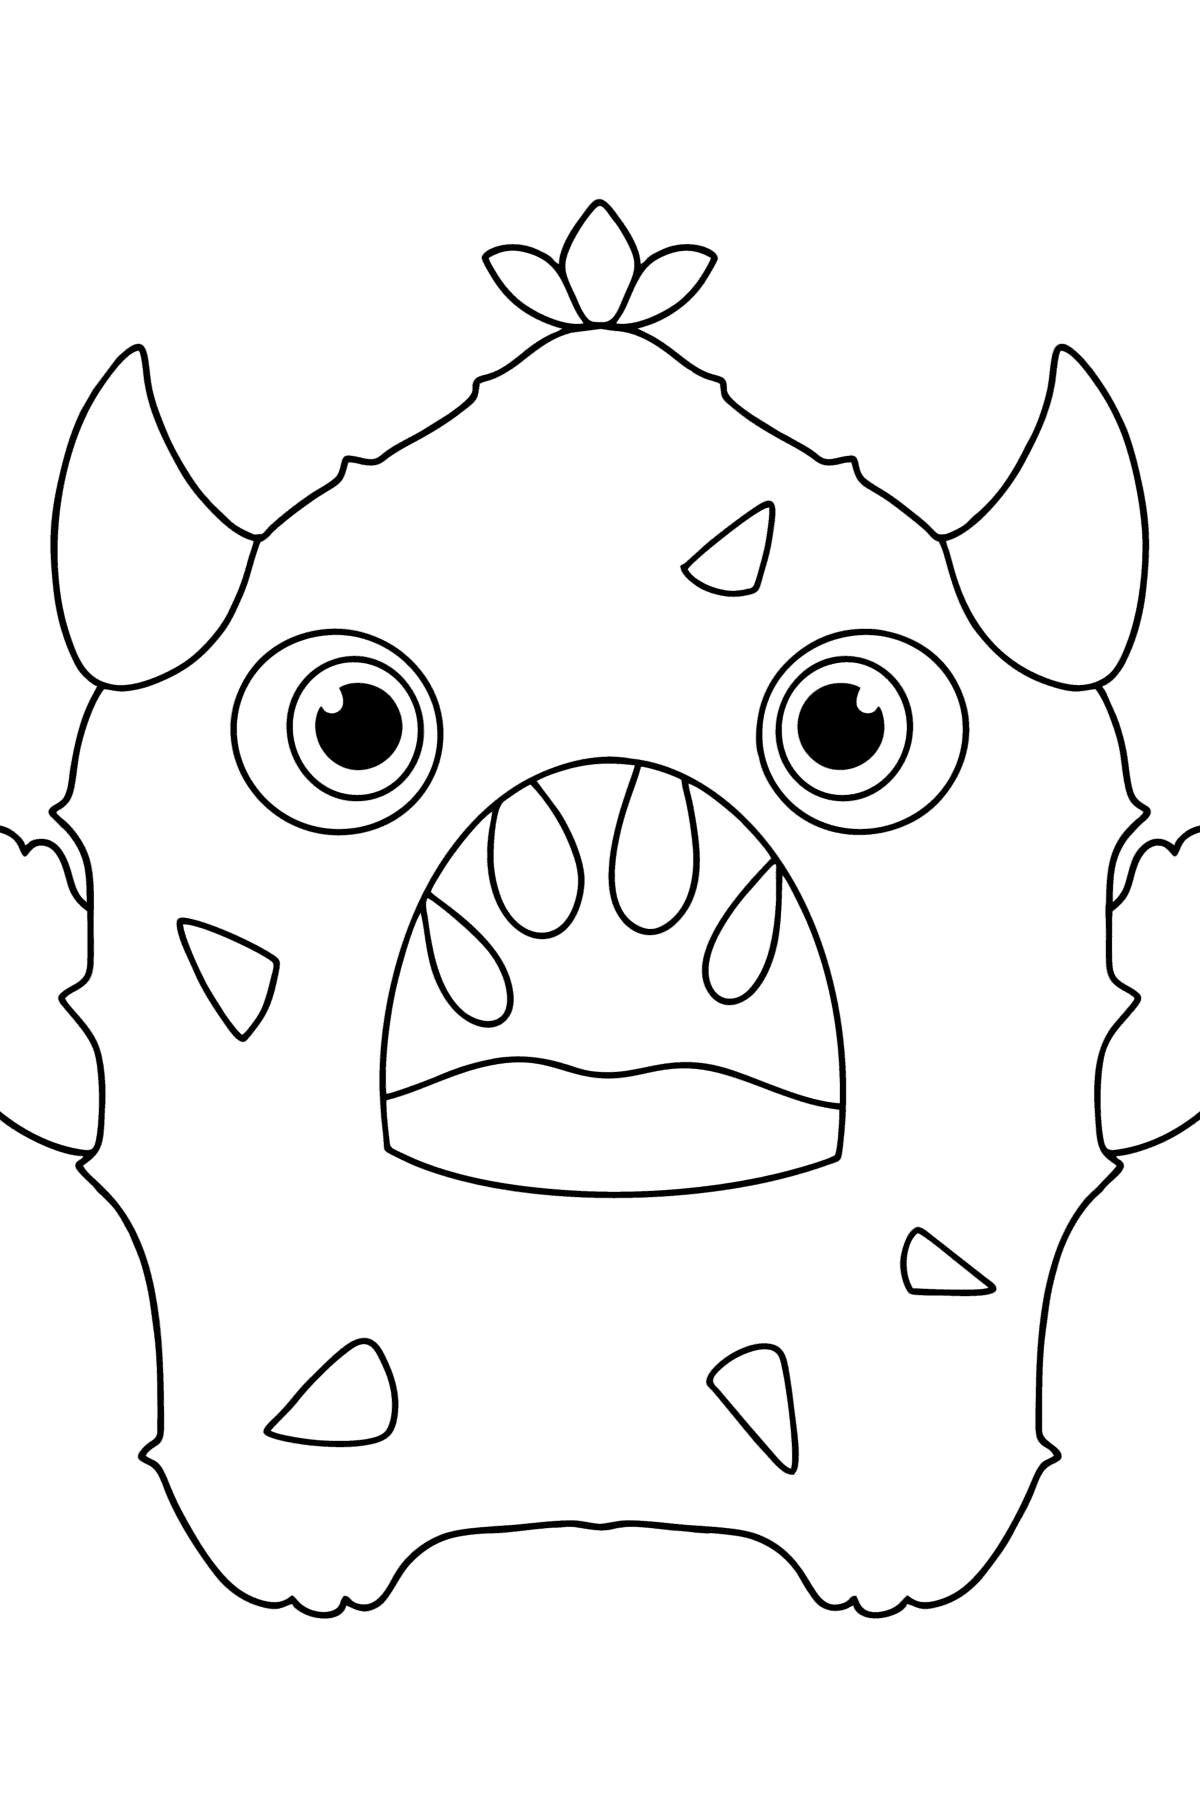 Monster cucumber сoloring page - Coloring Pages for Kids